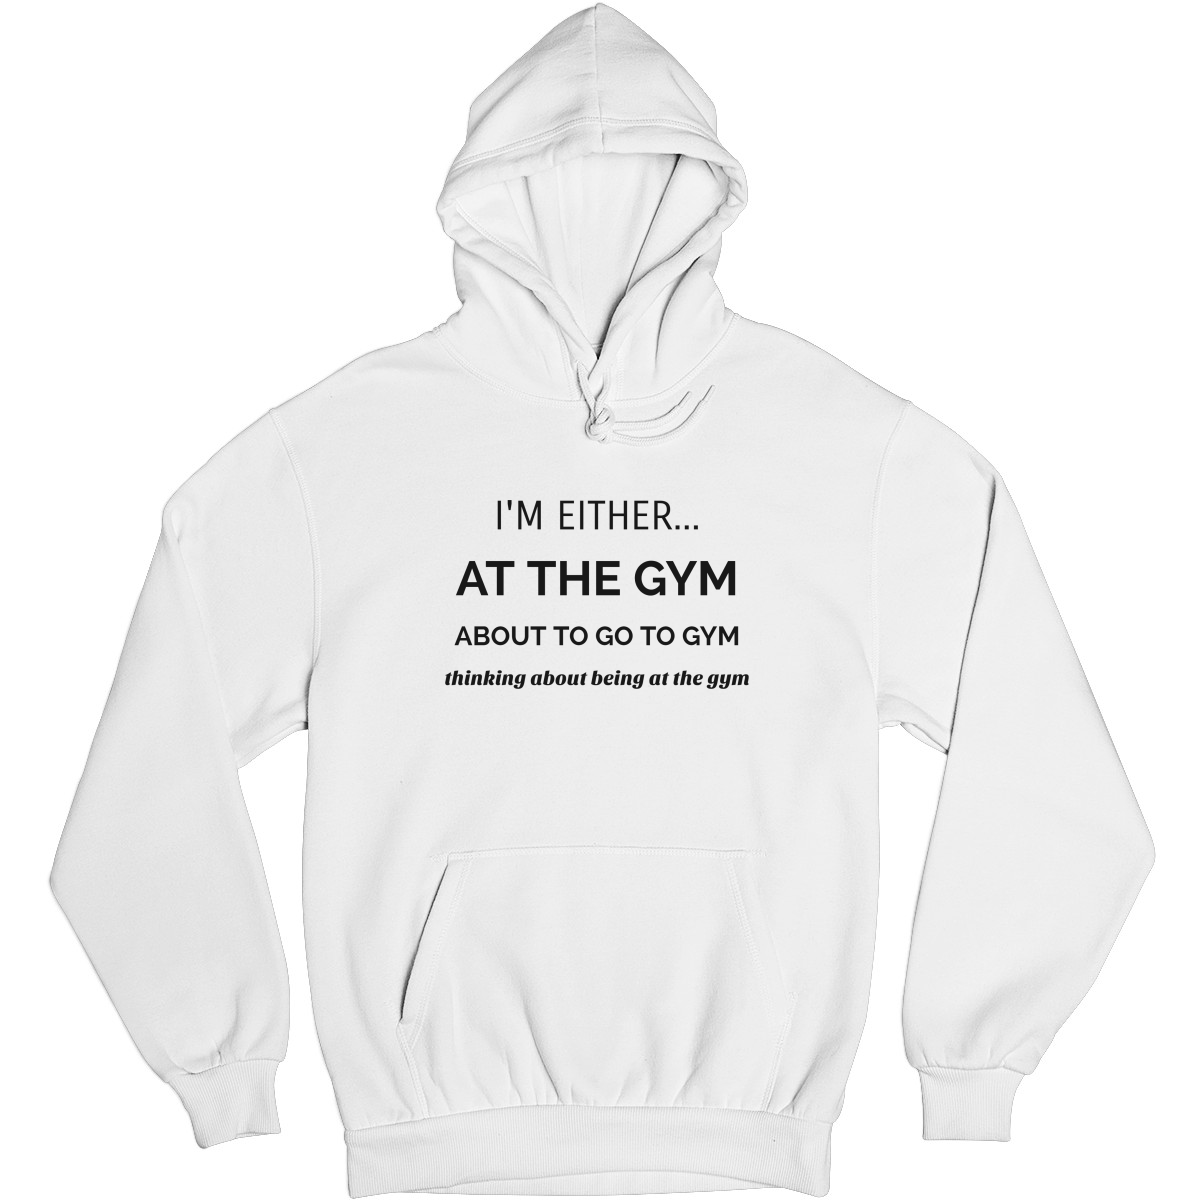 I’m either at the gym Unisex Hoodie | White